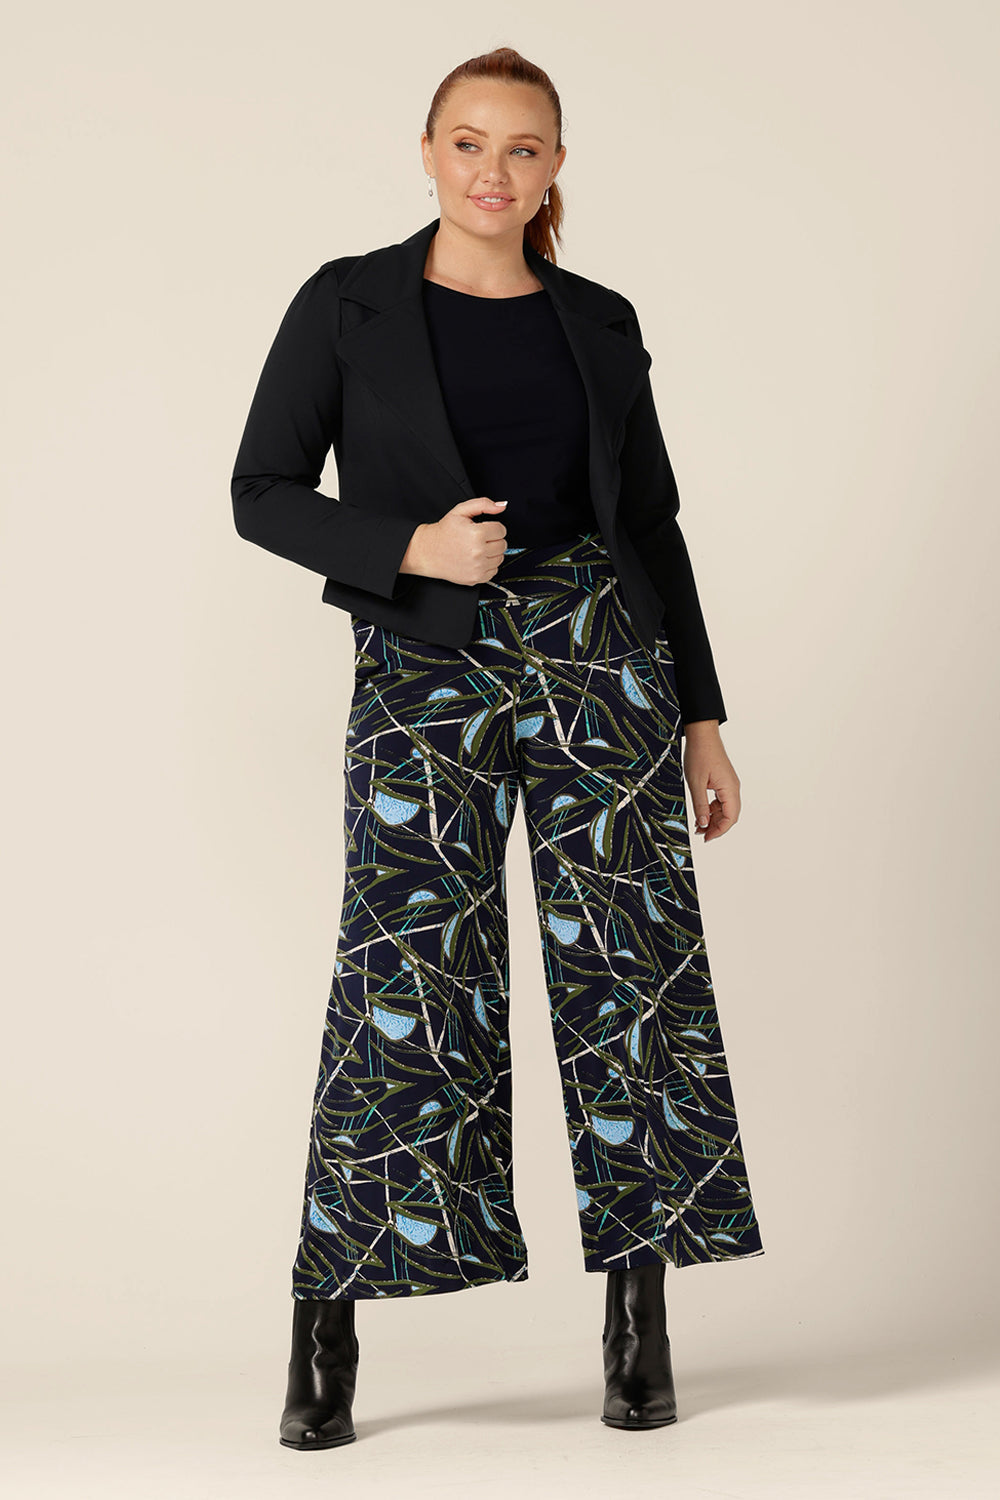 Worn with a tailored jacket and navy boat-neck top, these wide leg pants by Australian and New Zealand women's clothing label, L&F make great workwear pants. Shop in inclusive sizes, 8 to 24 and get free shipping to New Zealand for a limited time.